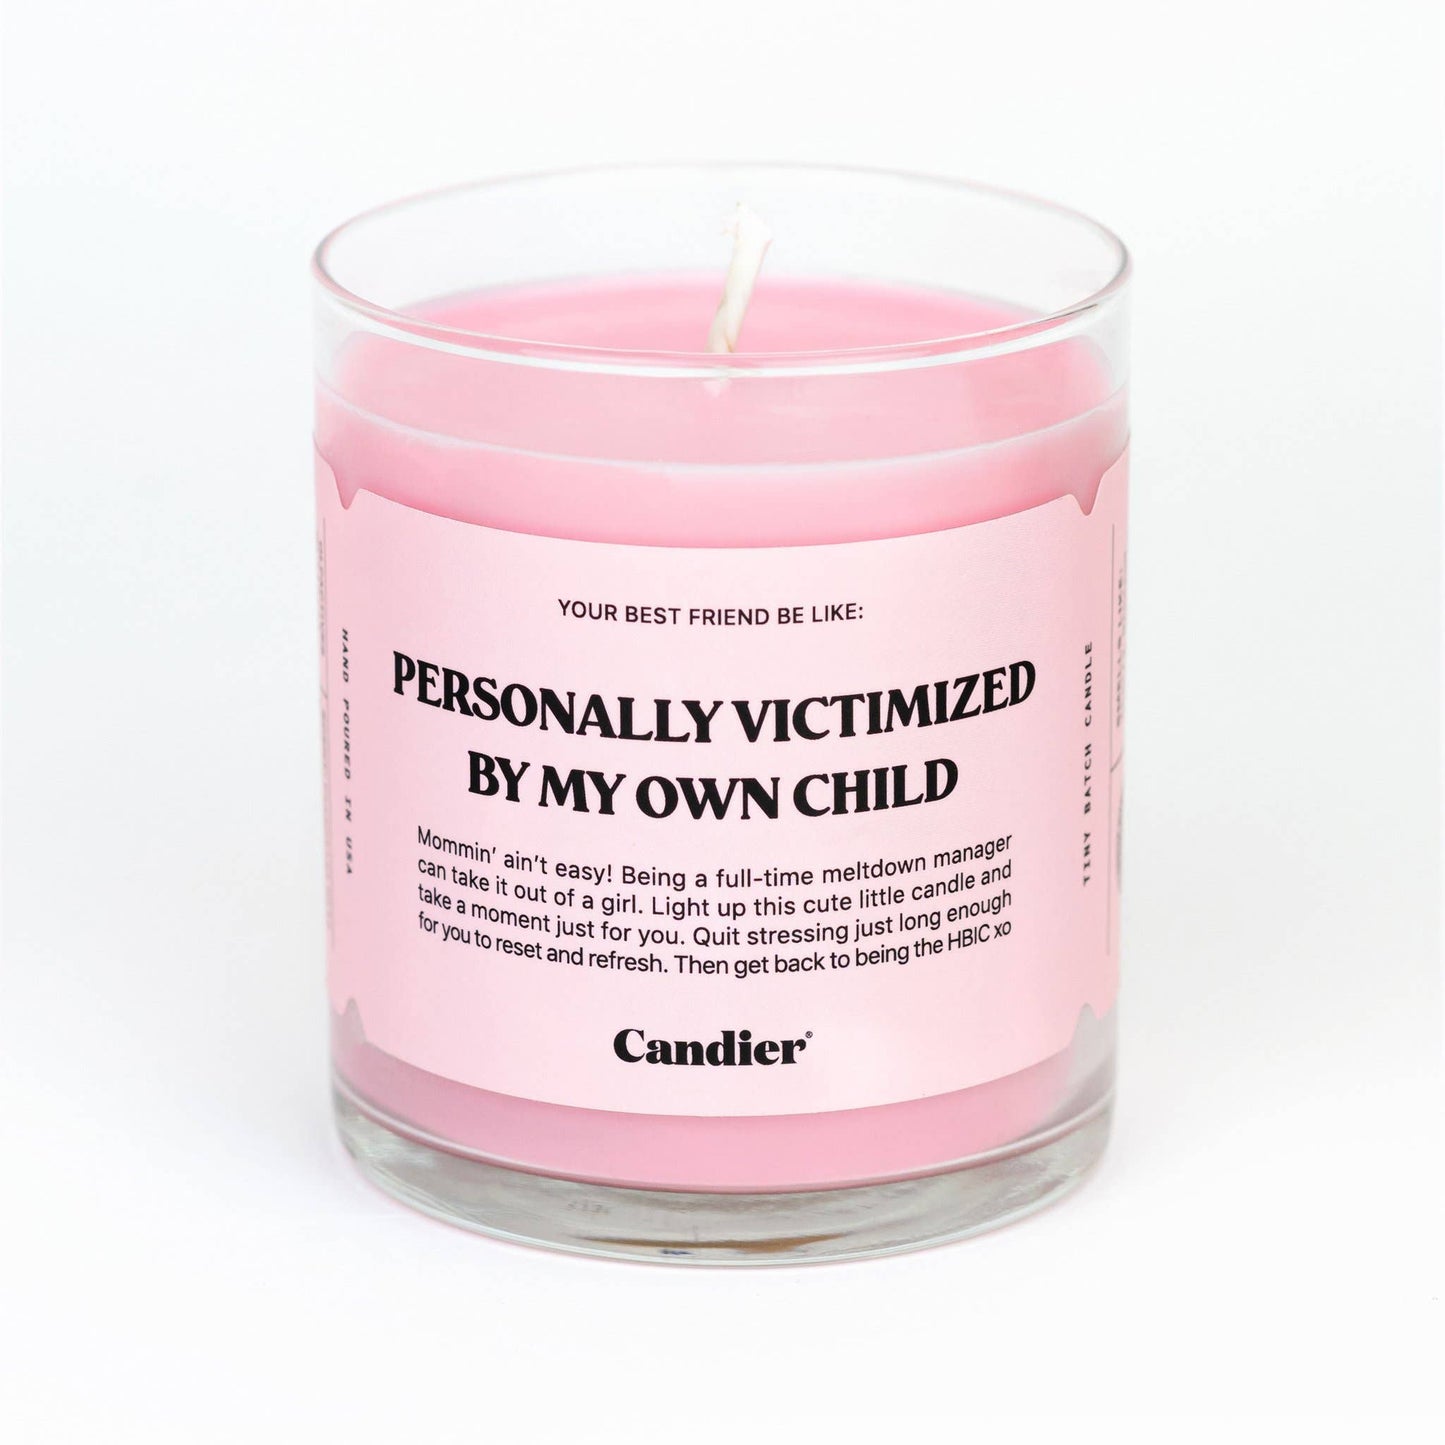 Personally Victimized by my own Child Candier 9oz Soy Candle